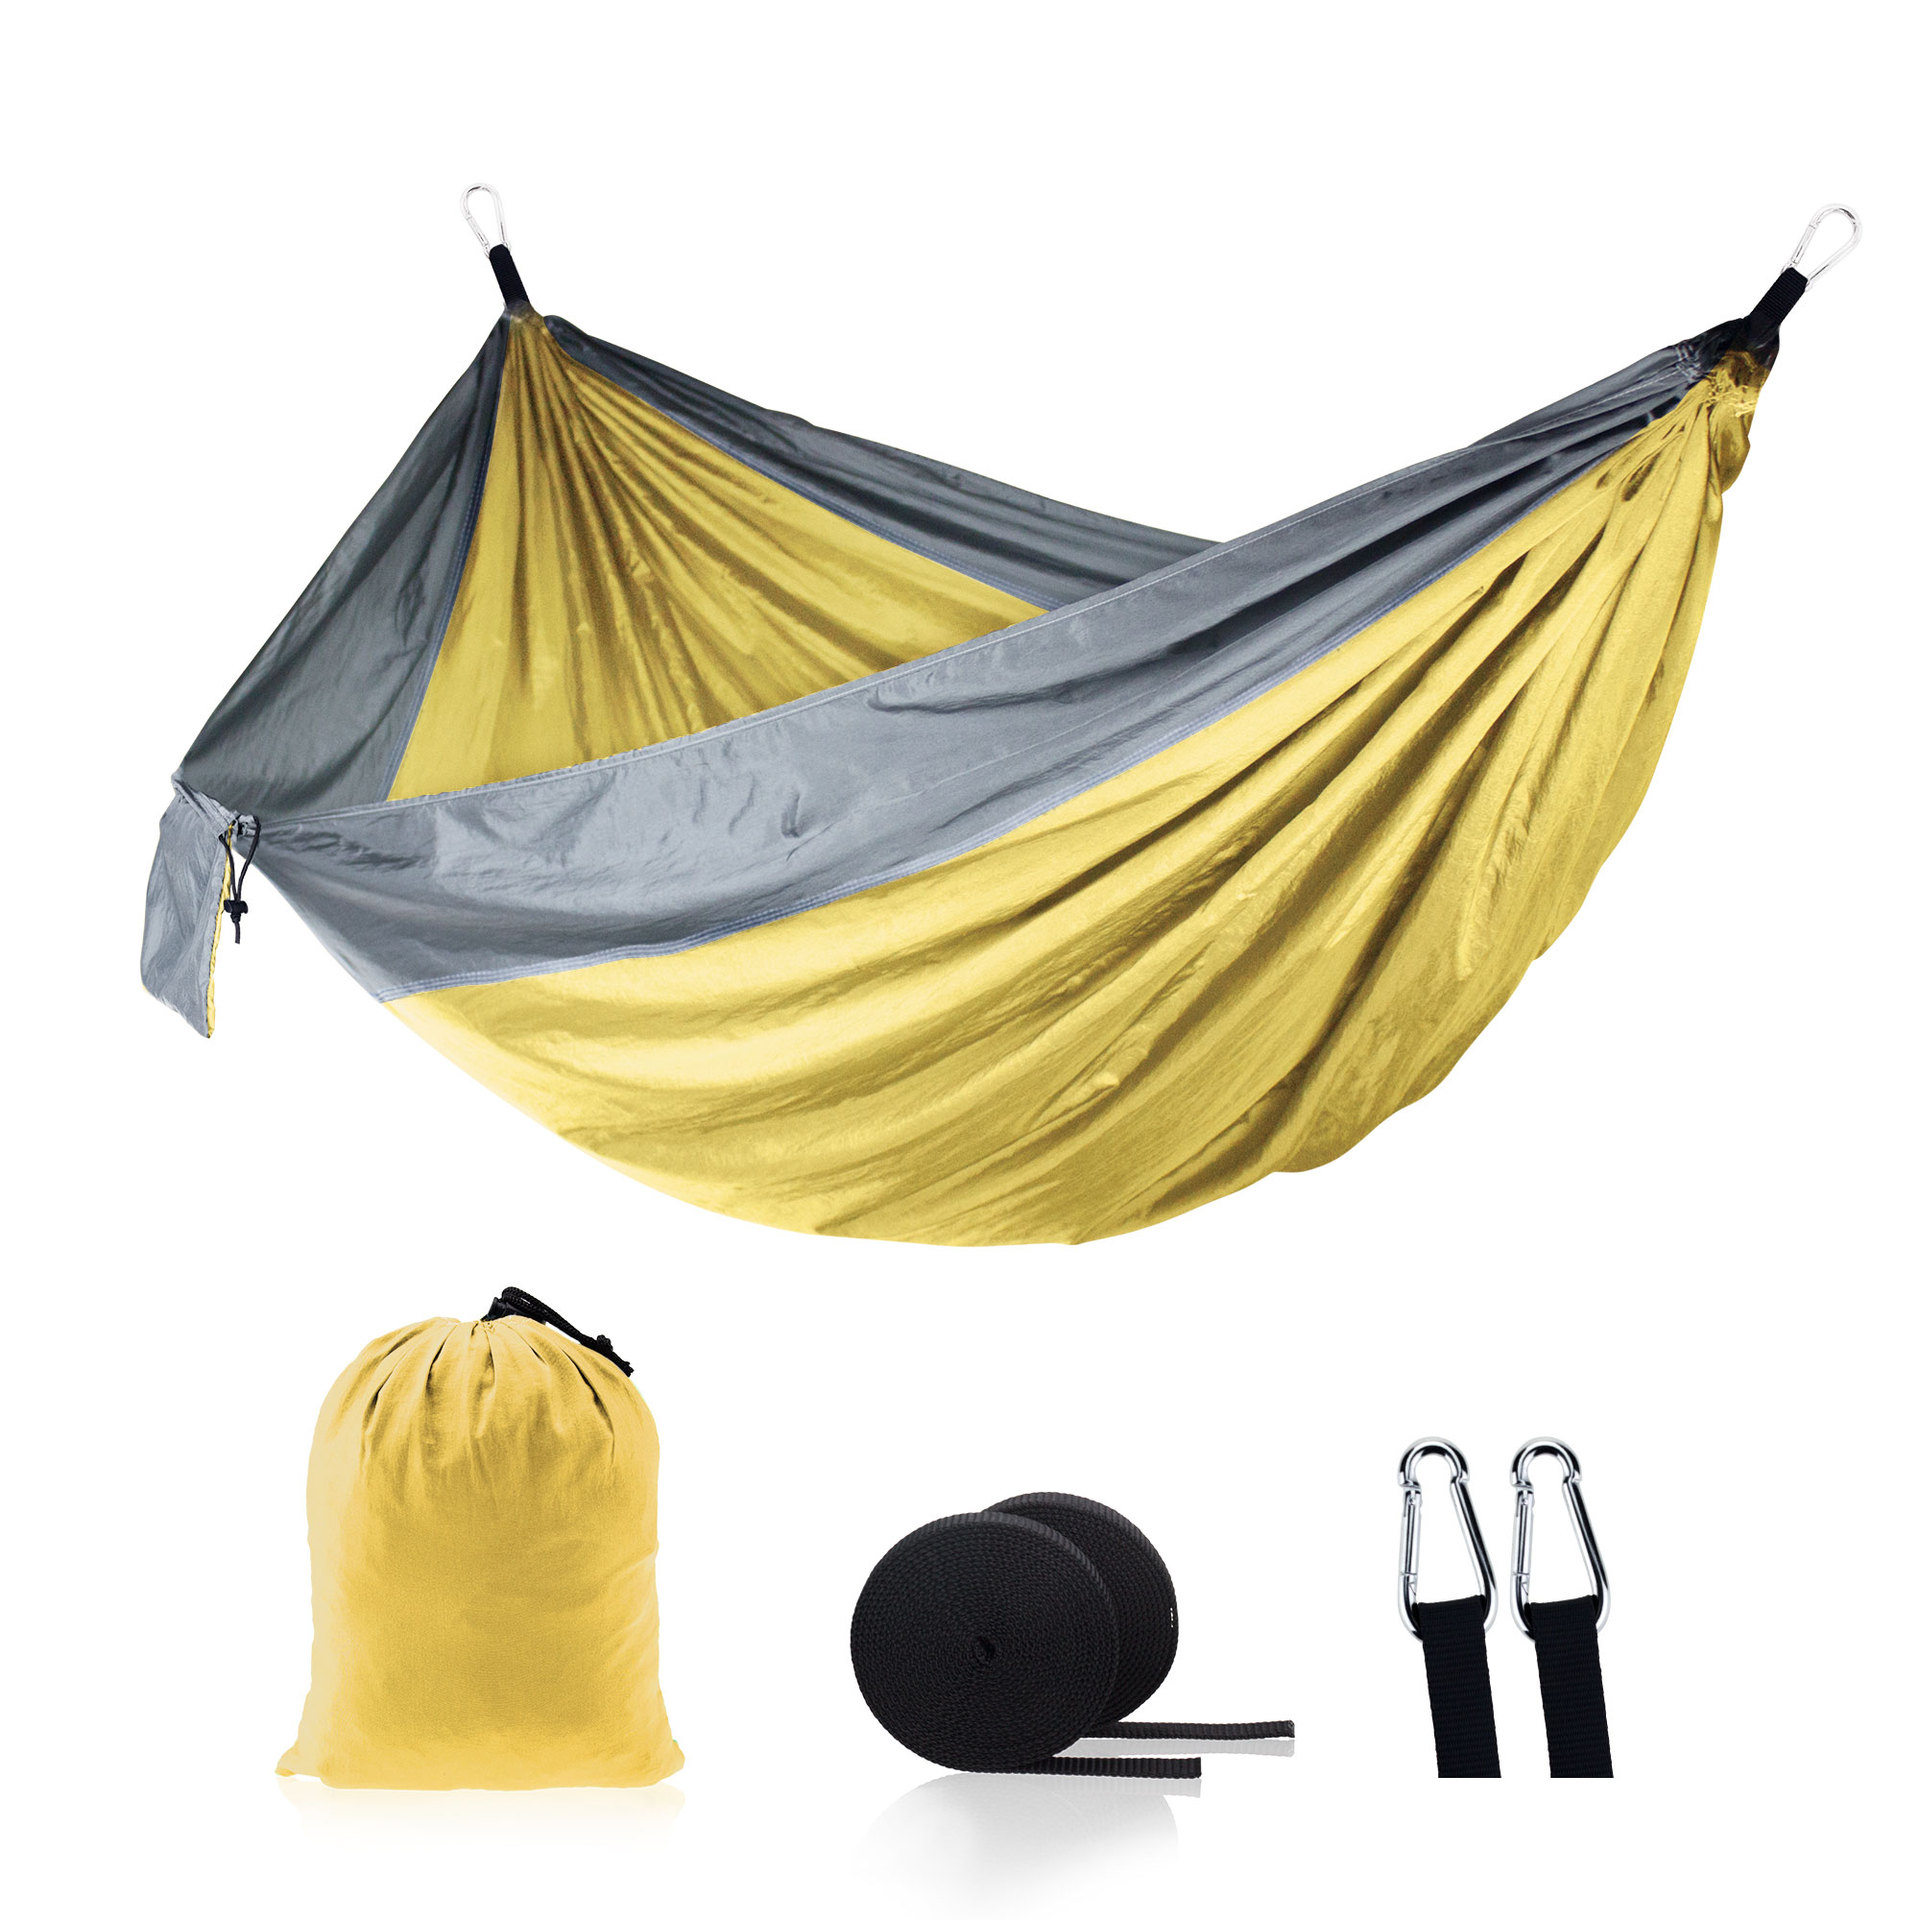 Manufacturer LOW MOQ Fast Delivery Custom Double and Single Travel Lightweight Outdoors Camping Hammock